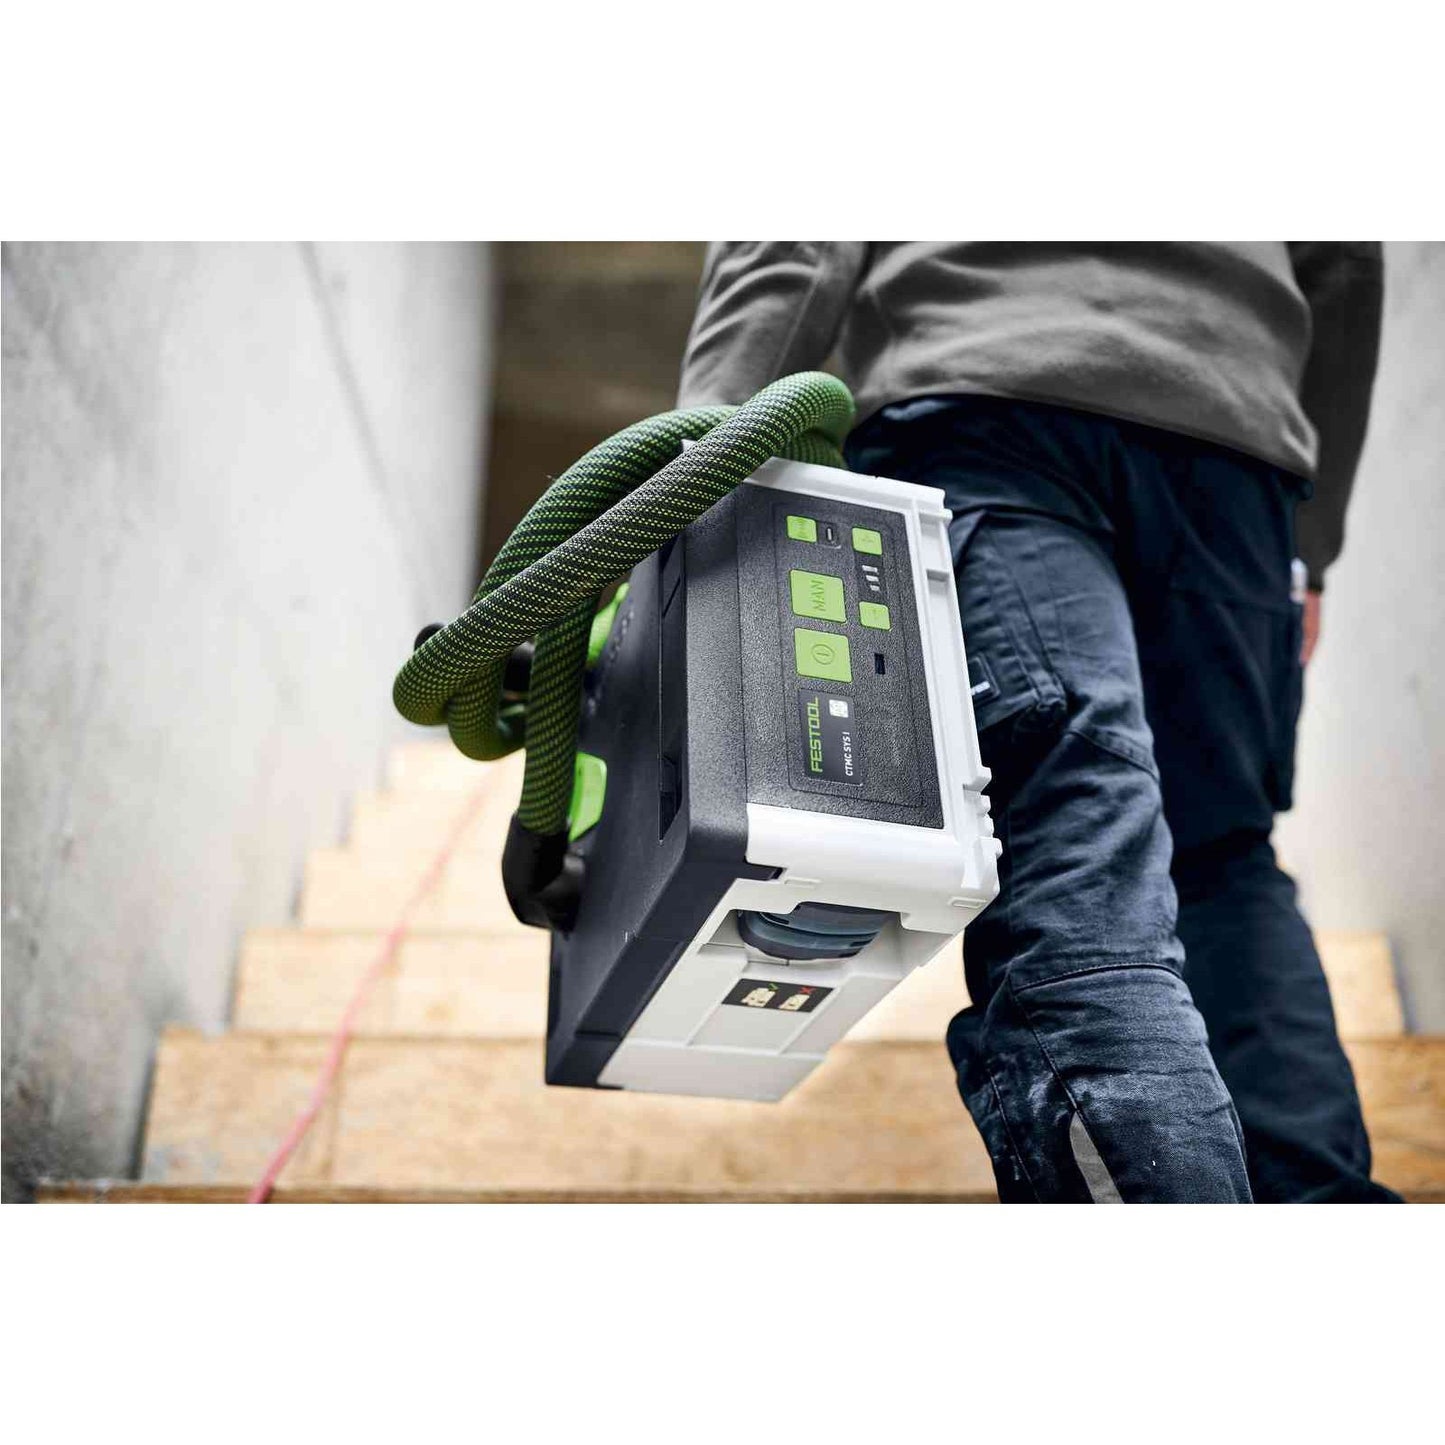 Festool Cordless Portable Dust Extractor CTLC SYS I 576936 tool-junction-nz